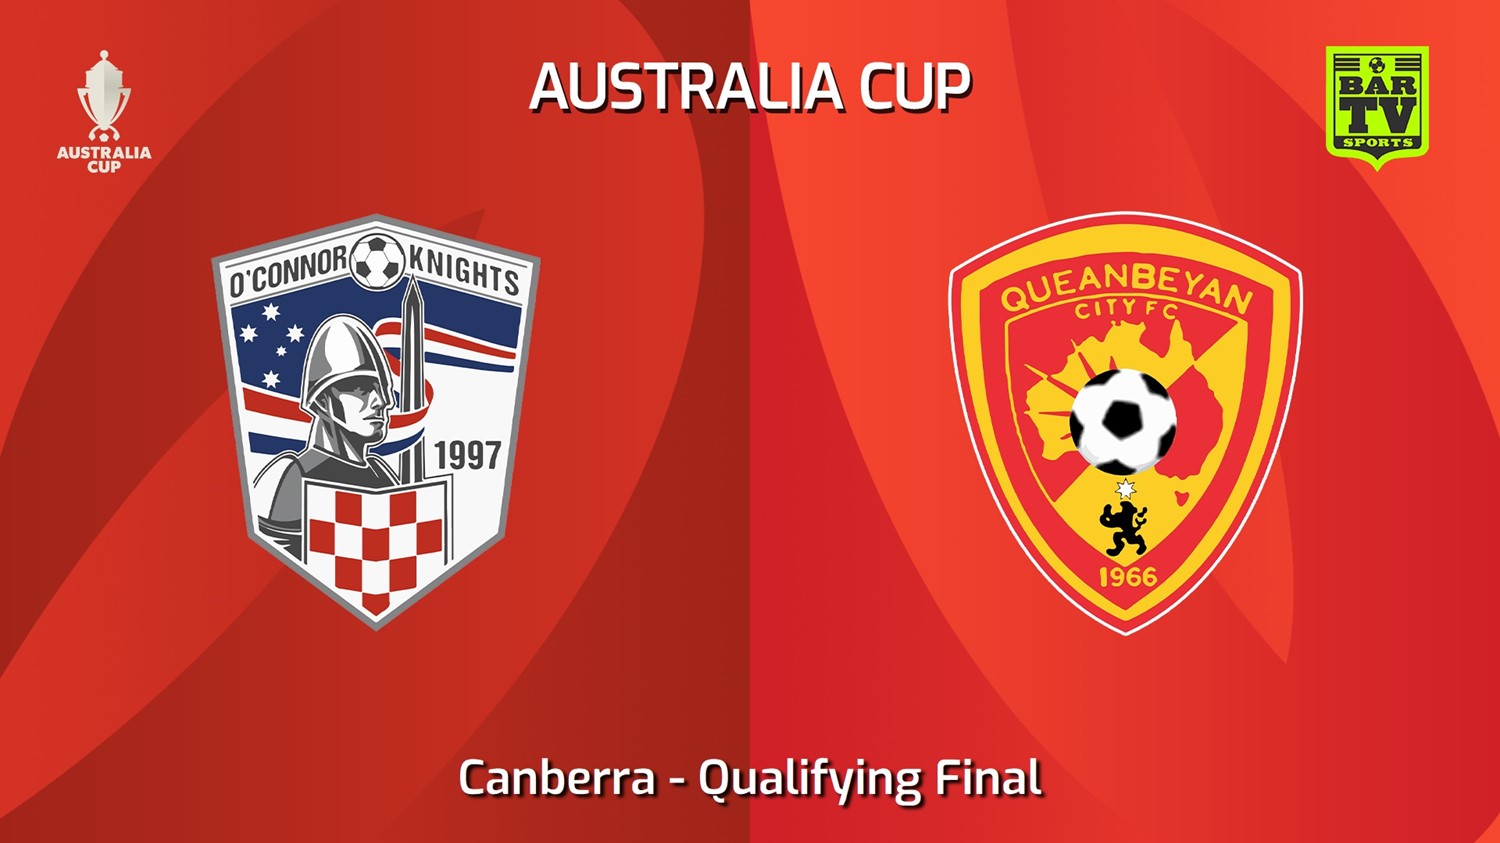 240430-video-Australia Cup Qualifying Canberra Qualifying Final - O'Connor Knights SC v Queanbeyan City SC Minigame Slate Image